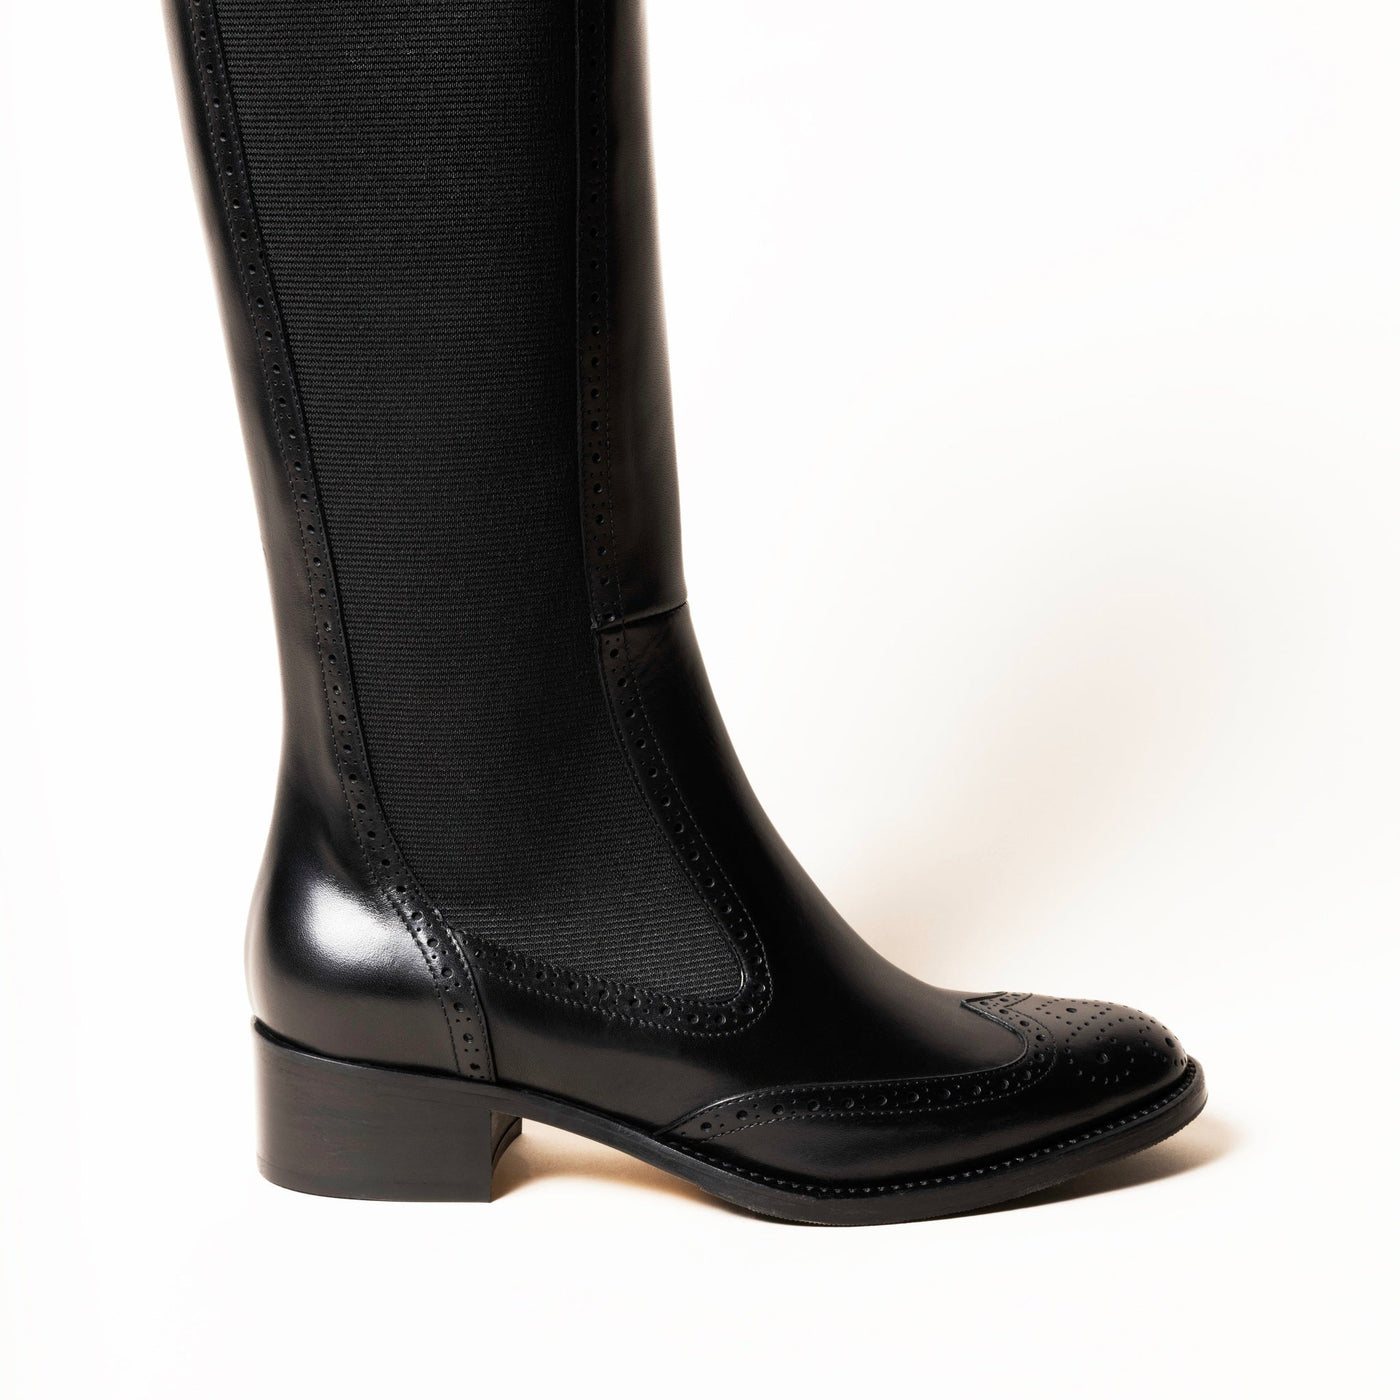 Black leather riding boot with brogue pattern. 